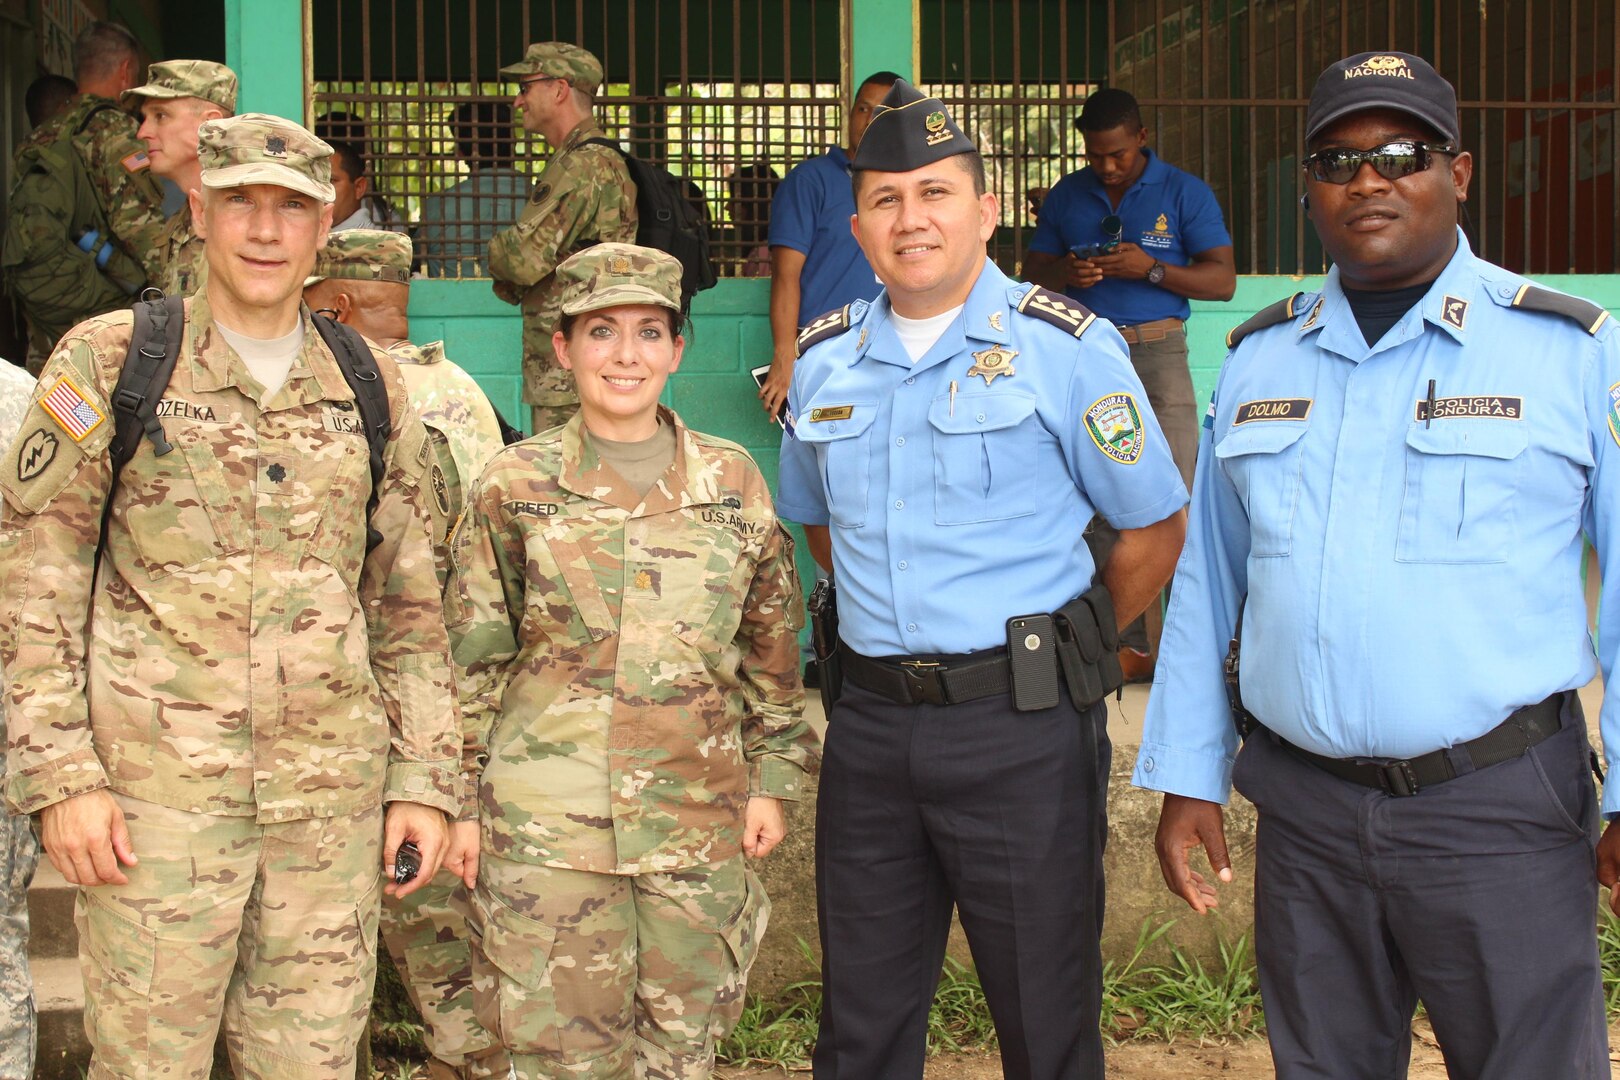 U.S. Army Lt. Col. Glenn Kozelka (far left), operations director for Joint Task Force-Bravo, and U.S. Army Major Rosemary Reed (left), Civil Military Operations deputy director for JTF-Bravo, pose for a photo with two Honduran Police Officers during a Medical Readiness Training Exercise in the village of La Boveda, Trujillo, July 29, 2016. A total of 1,072 patients of all ages received treatment during the two-day event that involved key leaders from both JTF-Bravo and Honduras. (U.S. Army photo by Maria Pinel)